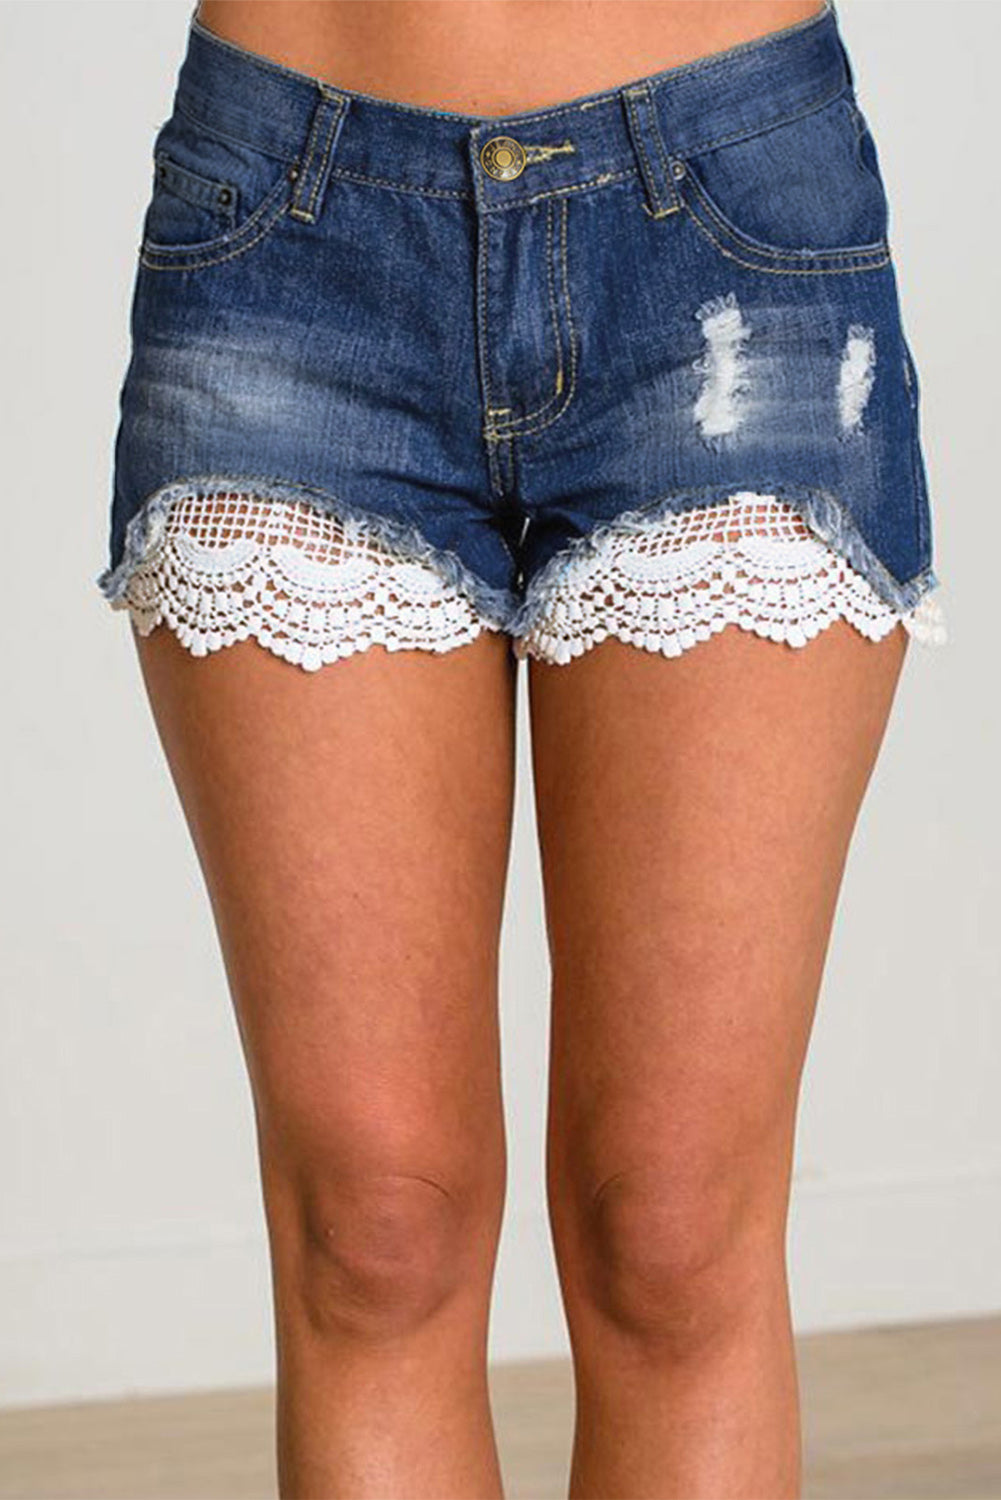 LC78193-5-S, LC78193-5-M, LC78193-5-L, LC78193-5-XL, LC78193-5-2XL, Blue Denim Shorts for Women Ripped Short Jeans Lace Splicing Distressed Denim Shorts